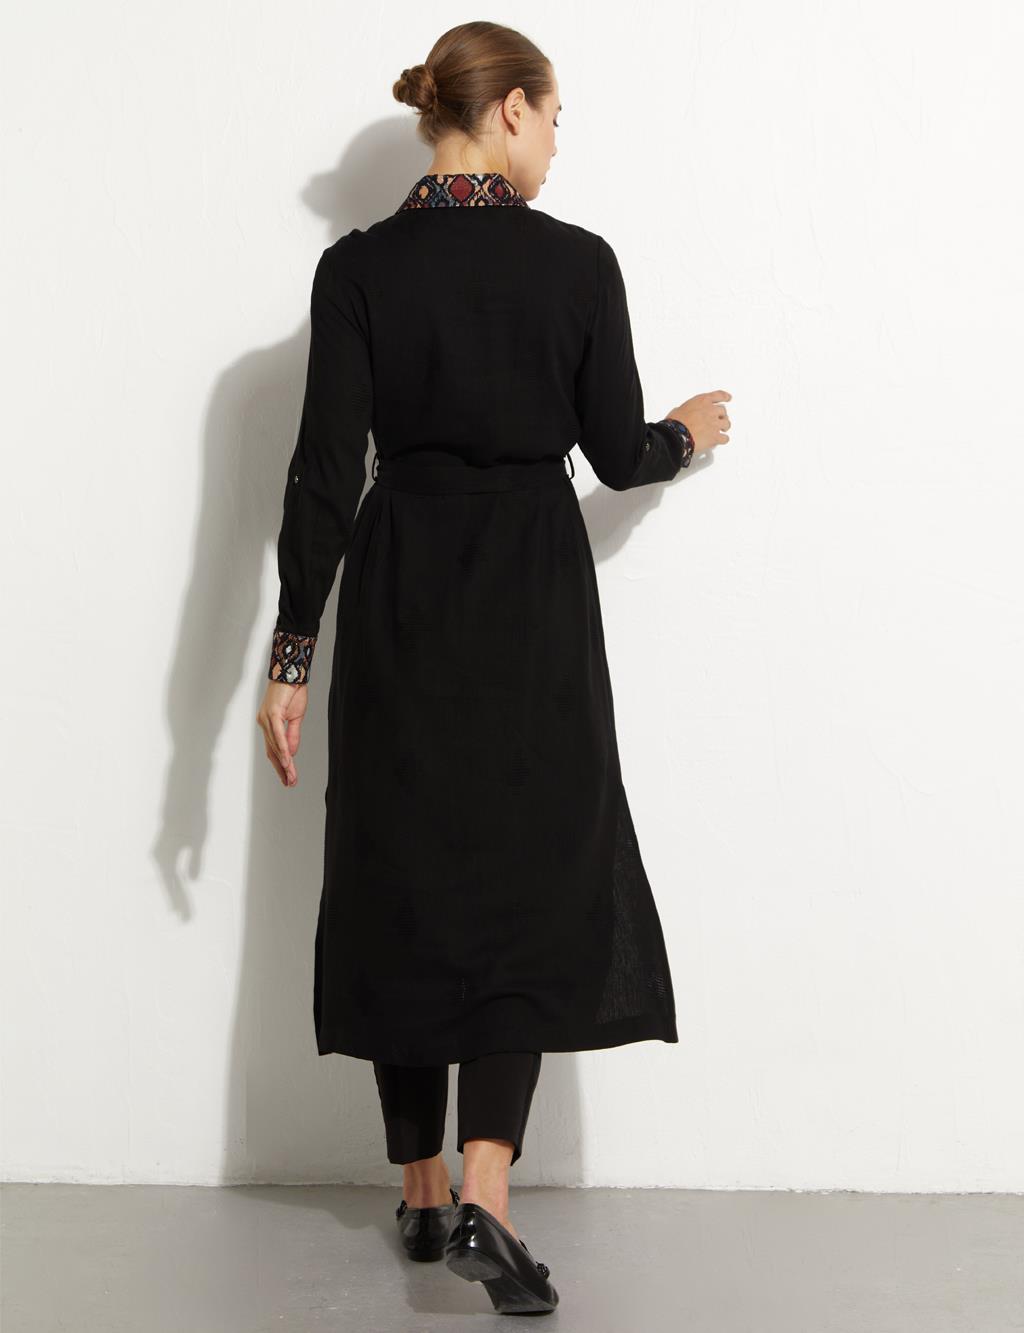 Collar and Cuff Detailed Tunic Black